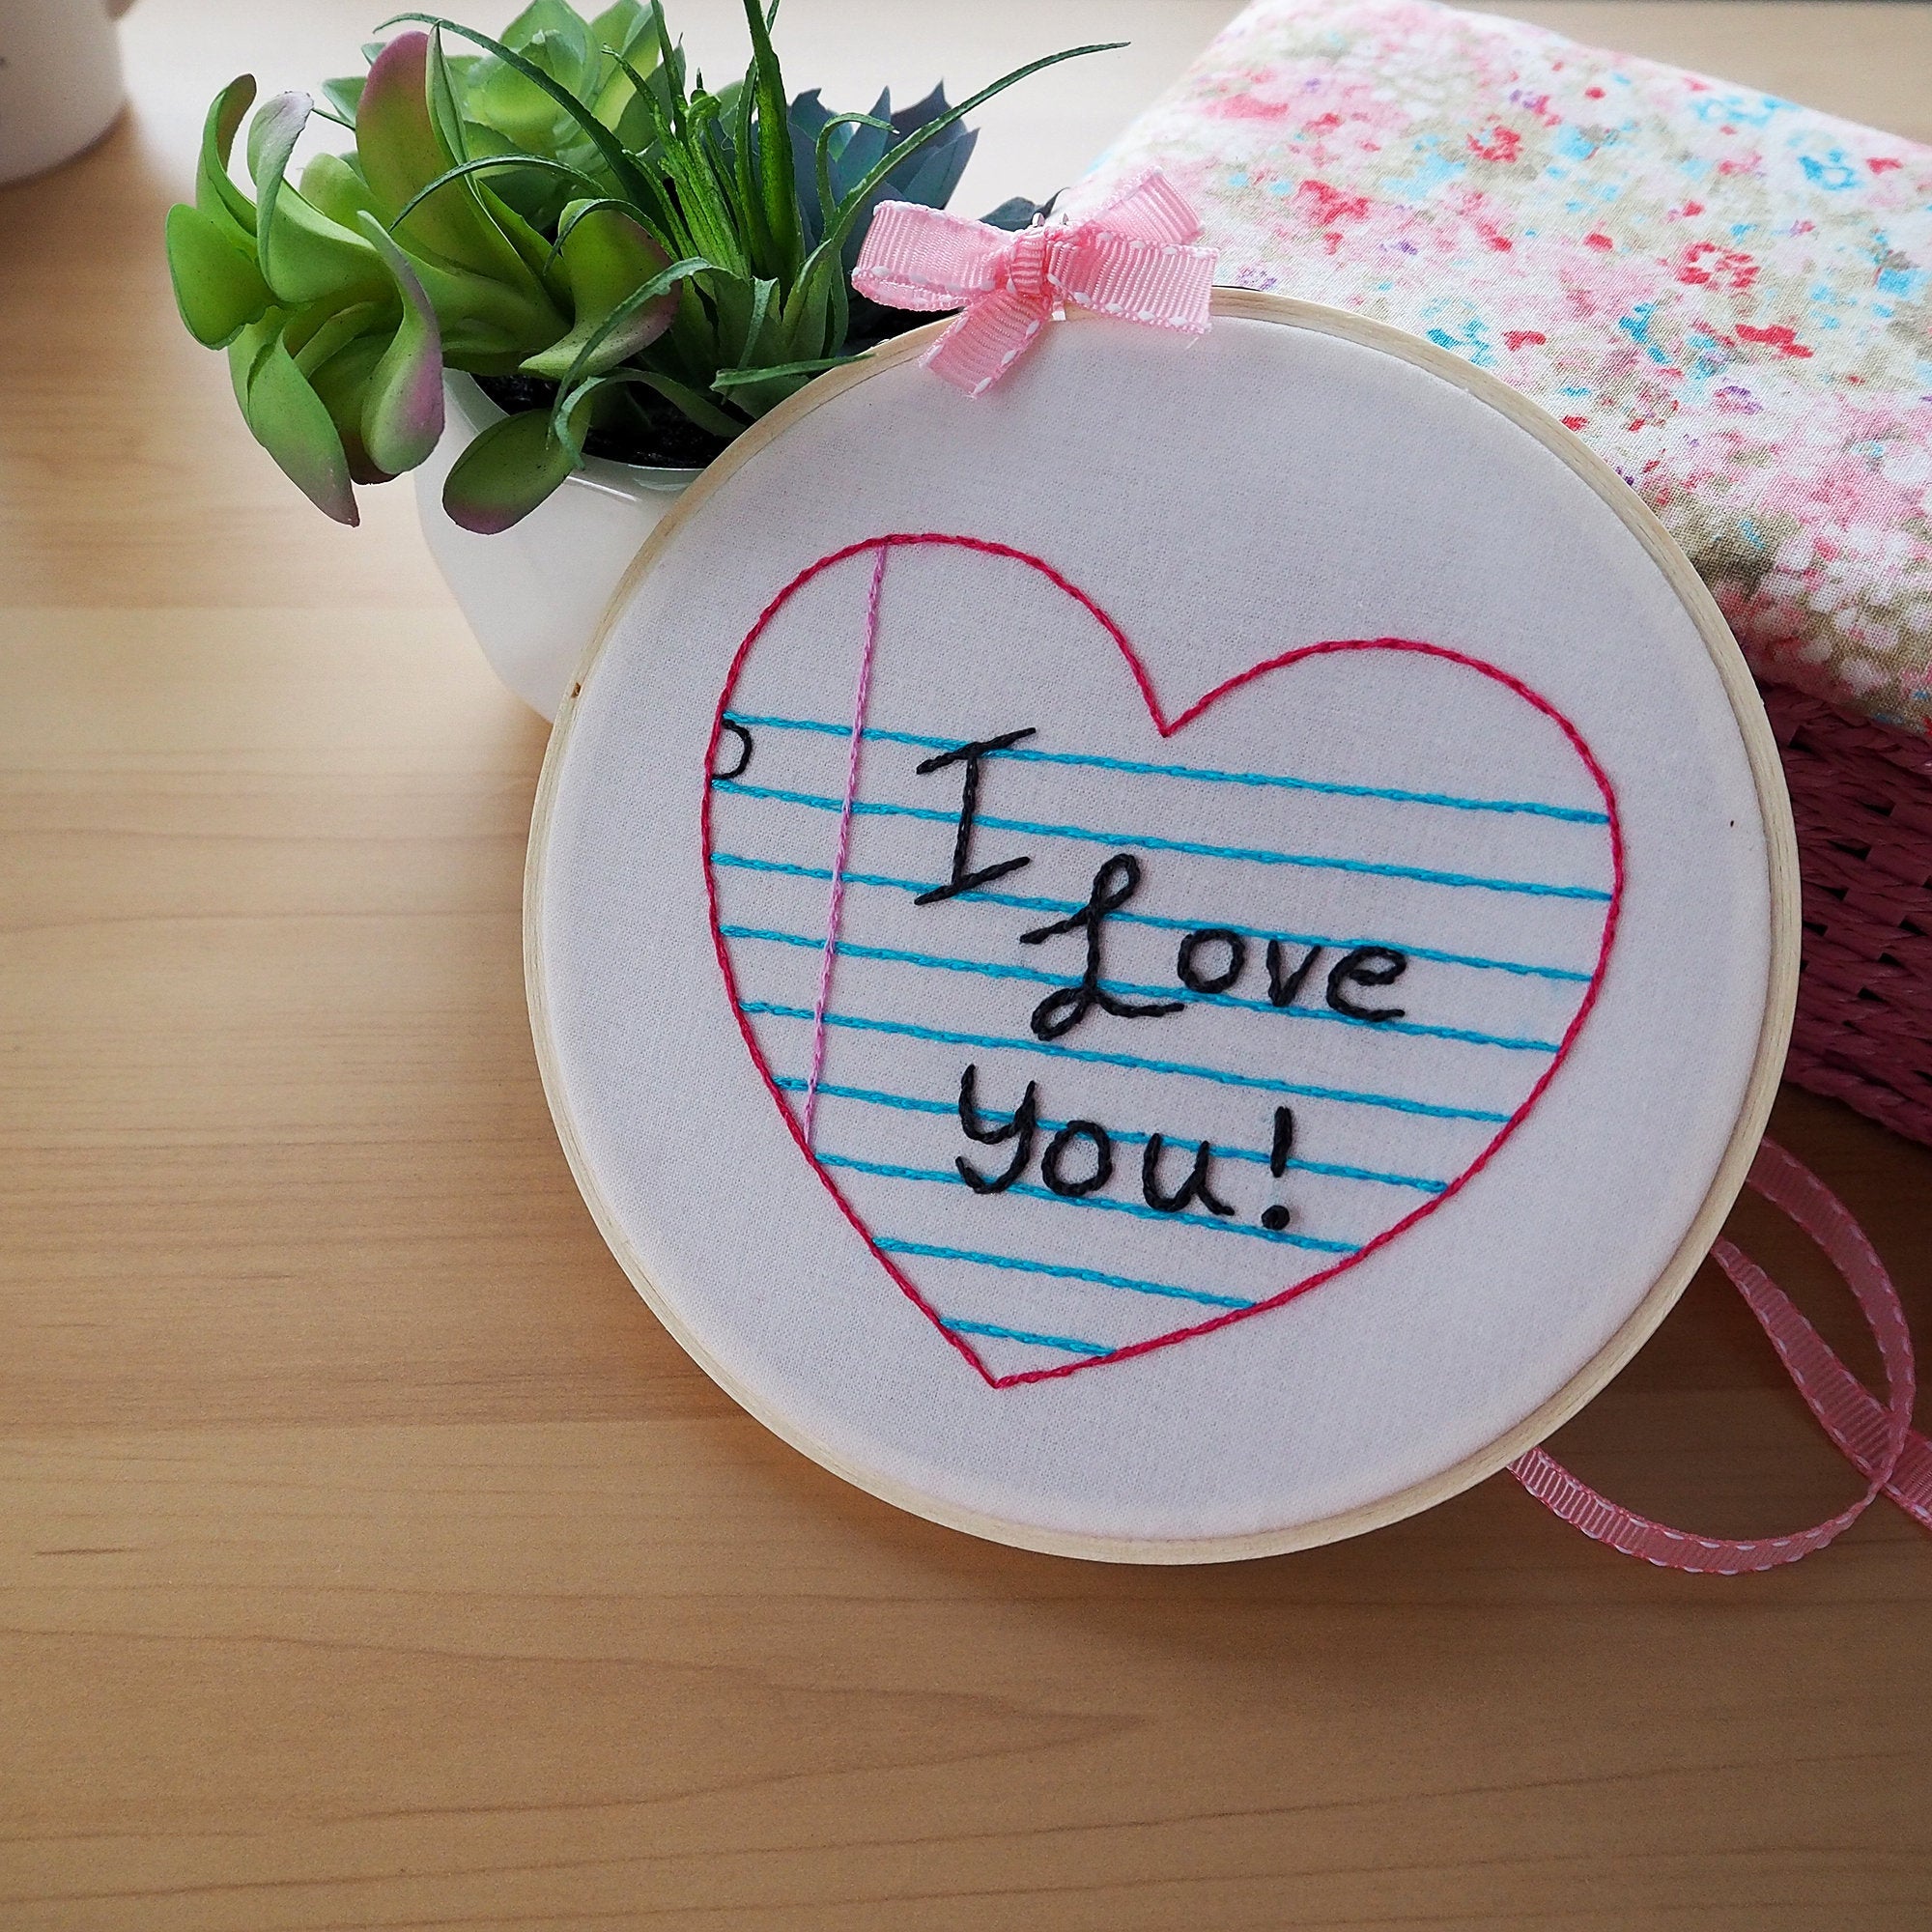 Kit - Love Note Hand Embroidery Kit - Add Your Own Message - Printed Fabric and Full Skeins of DMC Floss Included